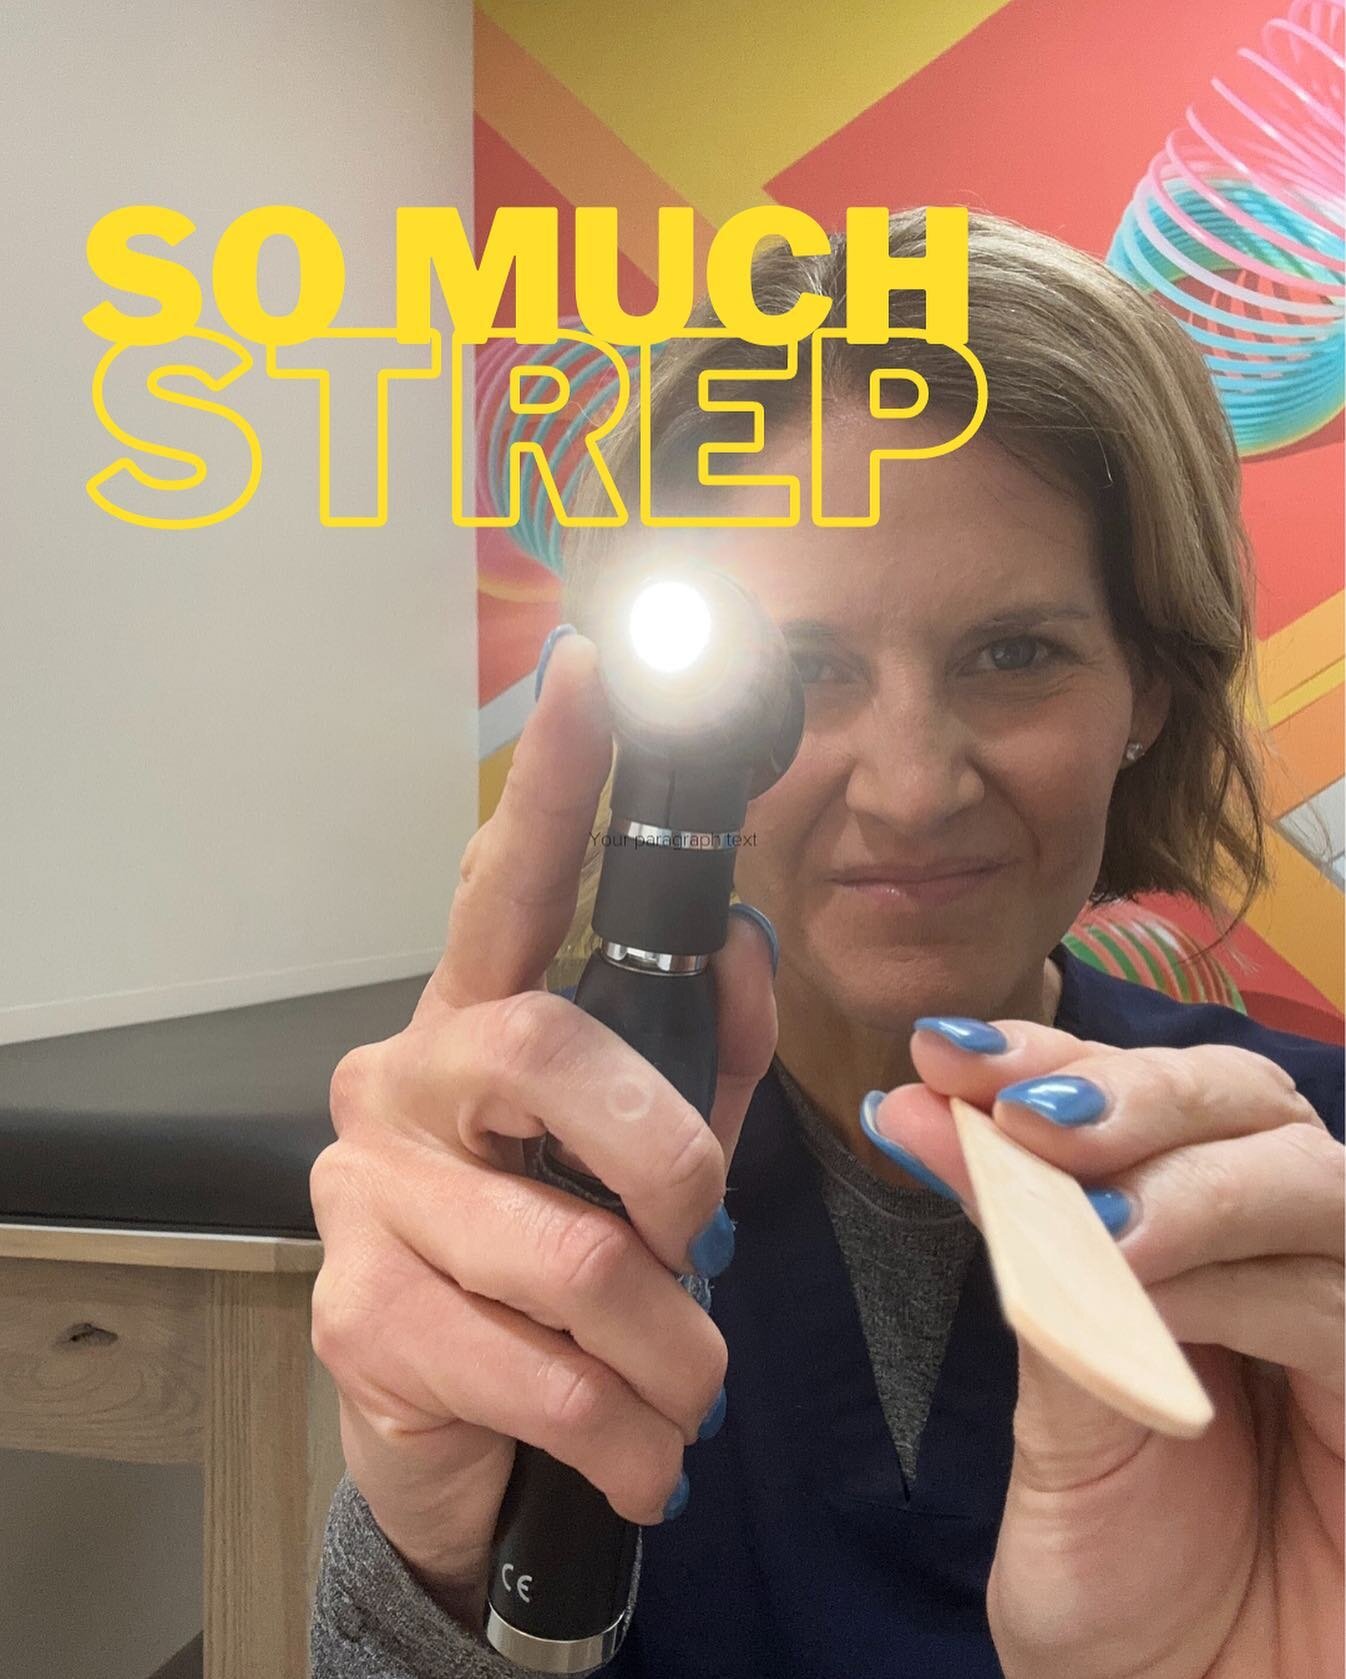 I&rsquo;m sick of all the strep. It&rsquo;s still everywhere &mdash; And so many kids have had it more than once. 👎🏼👎🏼

Why do kids keep getting infected?? I have some ideas..... 

🤒Strep doesn&rsquo;t play well with others. 
🤒Uncommon presenta